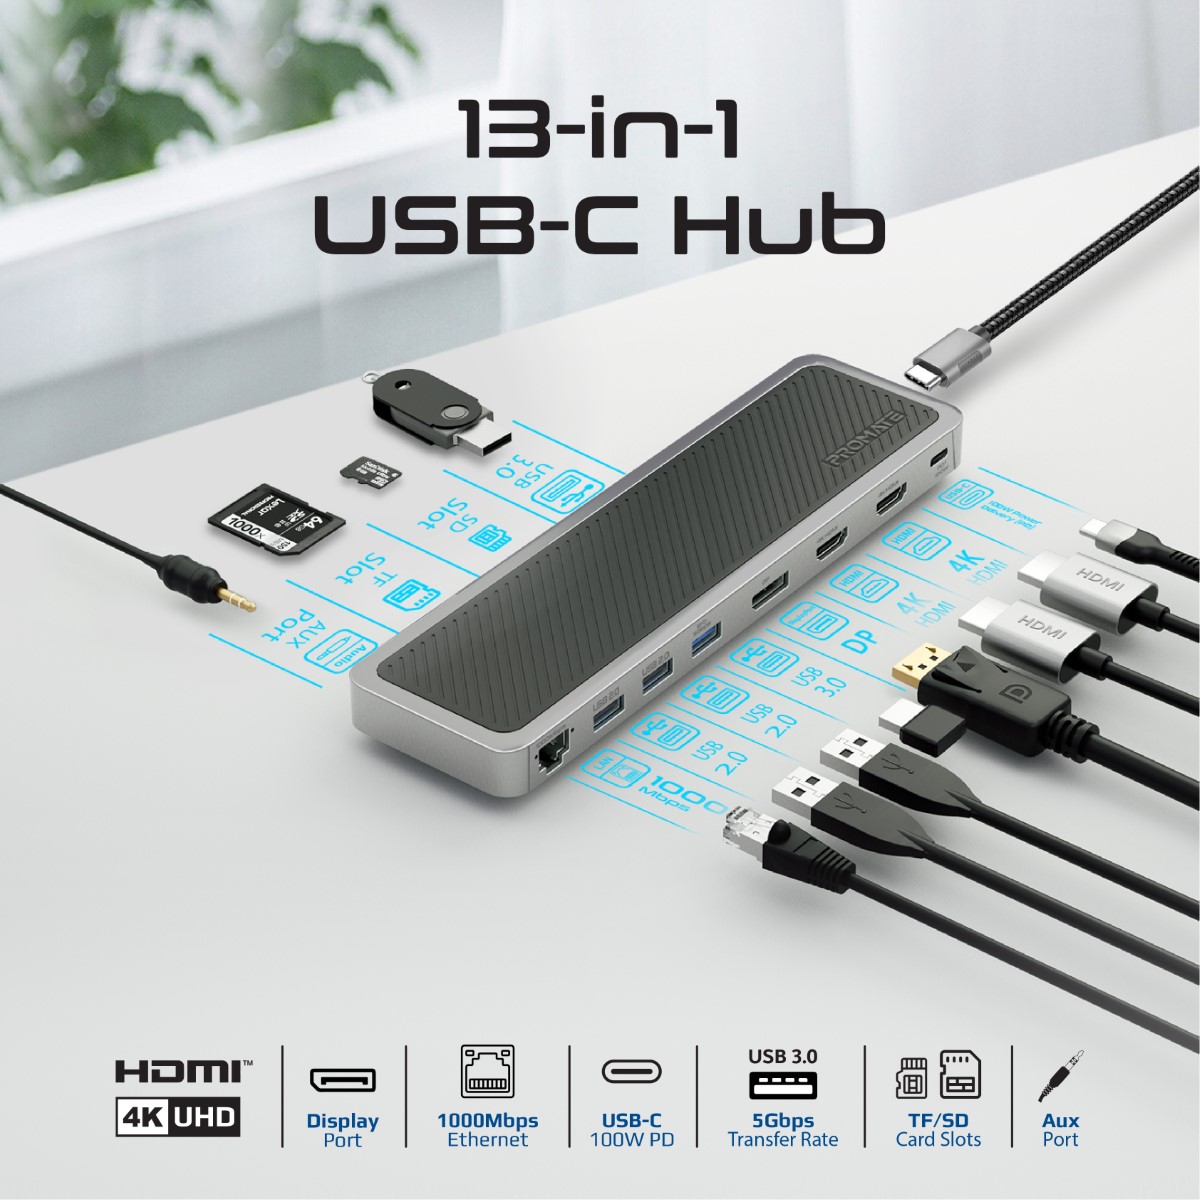 Promate USB-C™ Hub, 13-in-1 Multi-Display Hub with Dual 4K HDMI, 4K DisplayPort, 1000Mbps LAN, 100W USB-C™ Power Delivery, AUX, SD/TF Card Slot, USB 3.0 and USB 2.0 Ports for MacBook Pro, Dell, ApexHub-MST